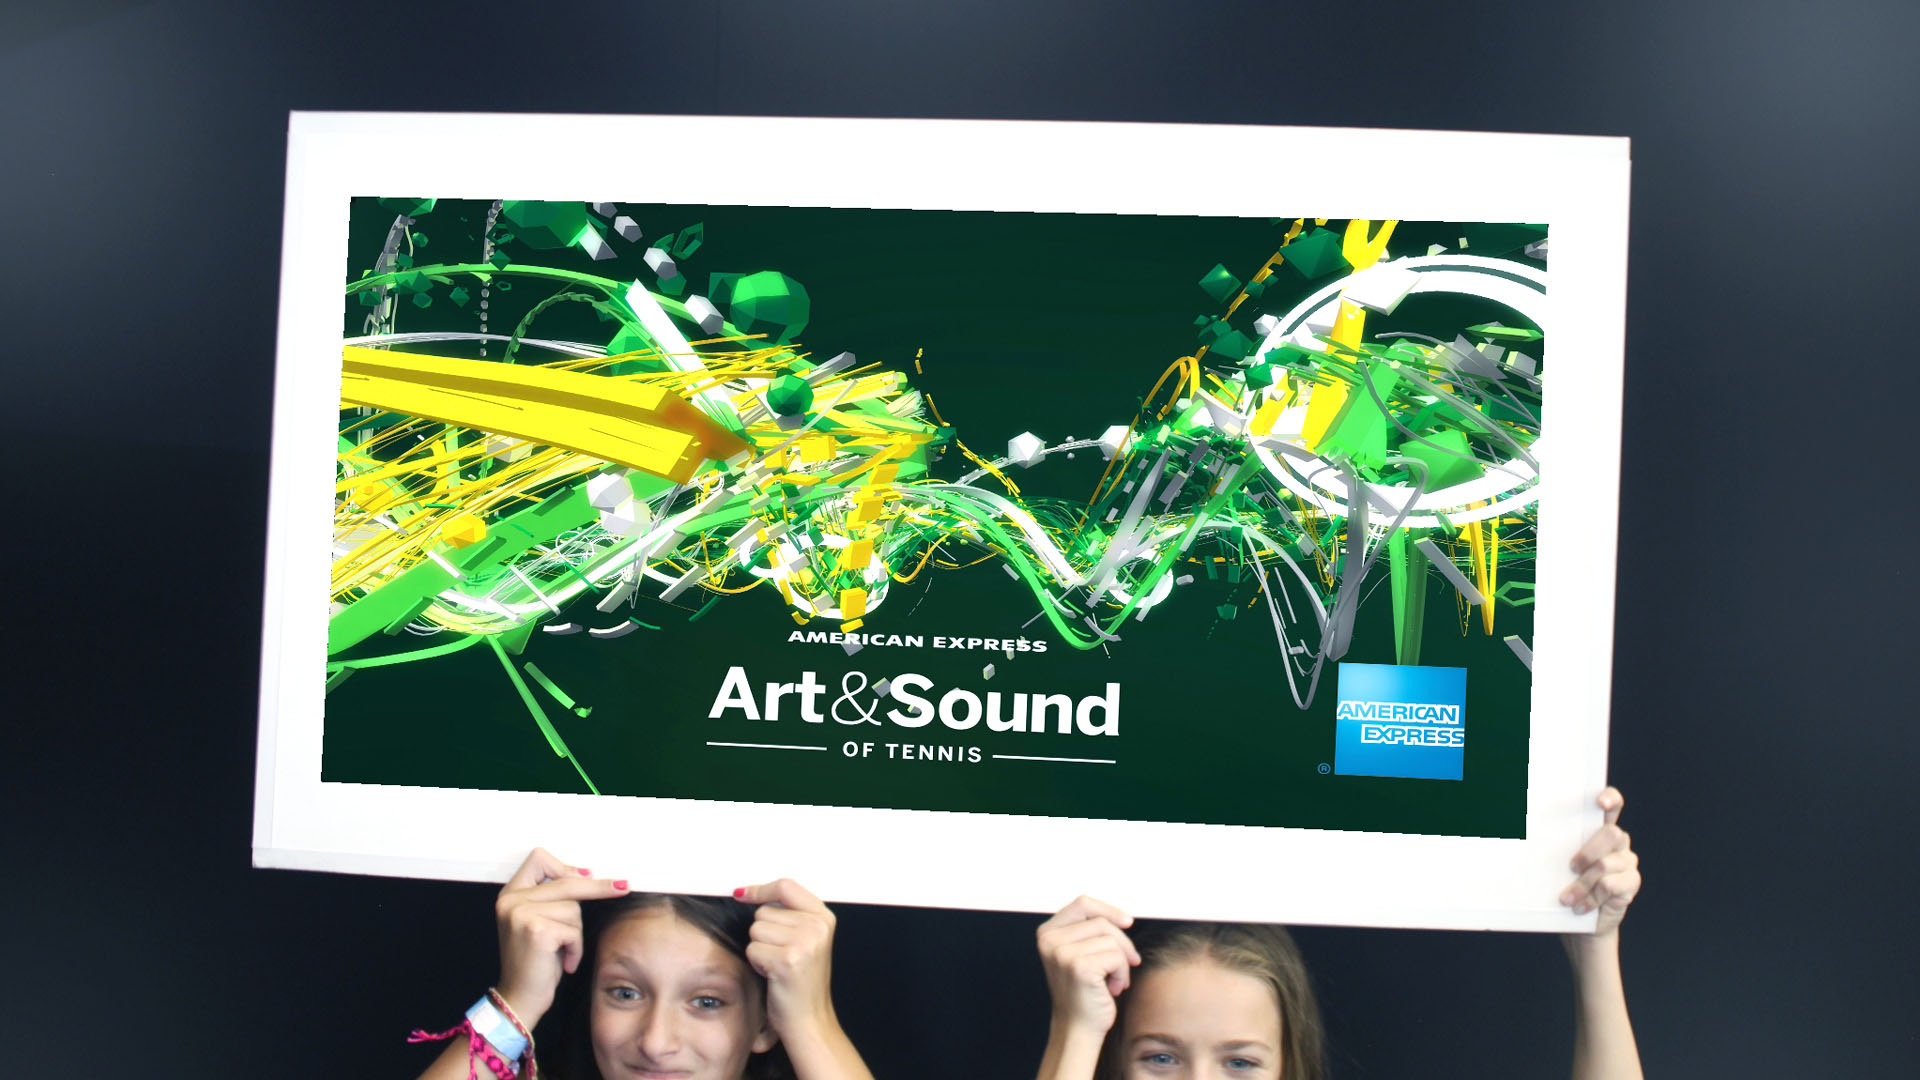 Art and Sound of Tennis - participants could get their picture taken with their creation